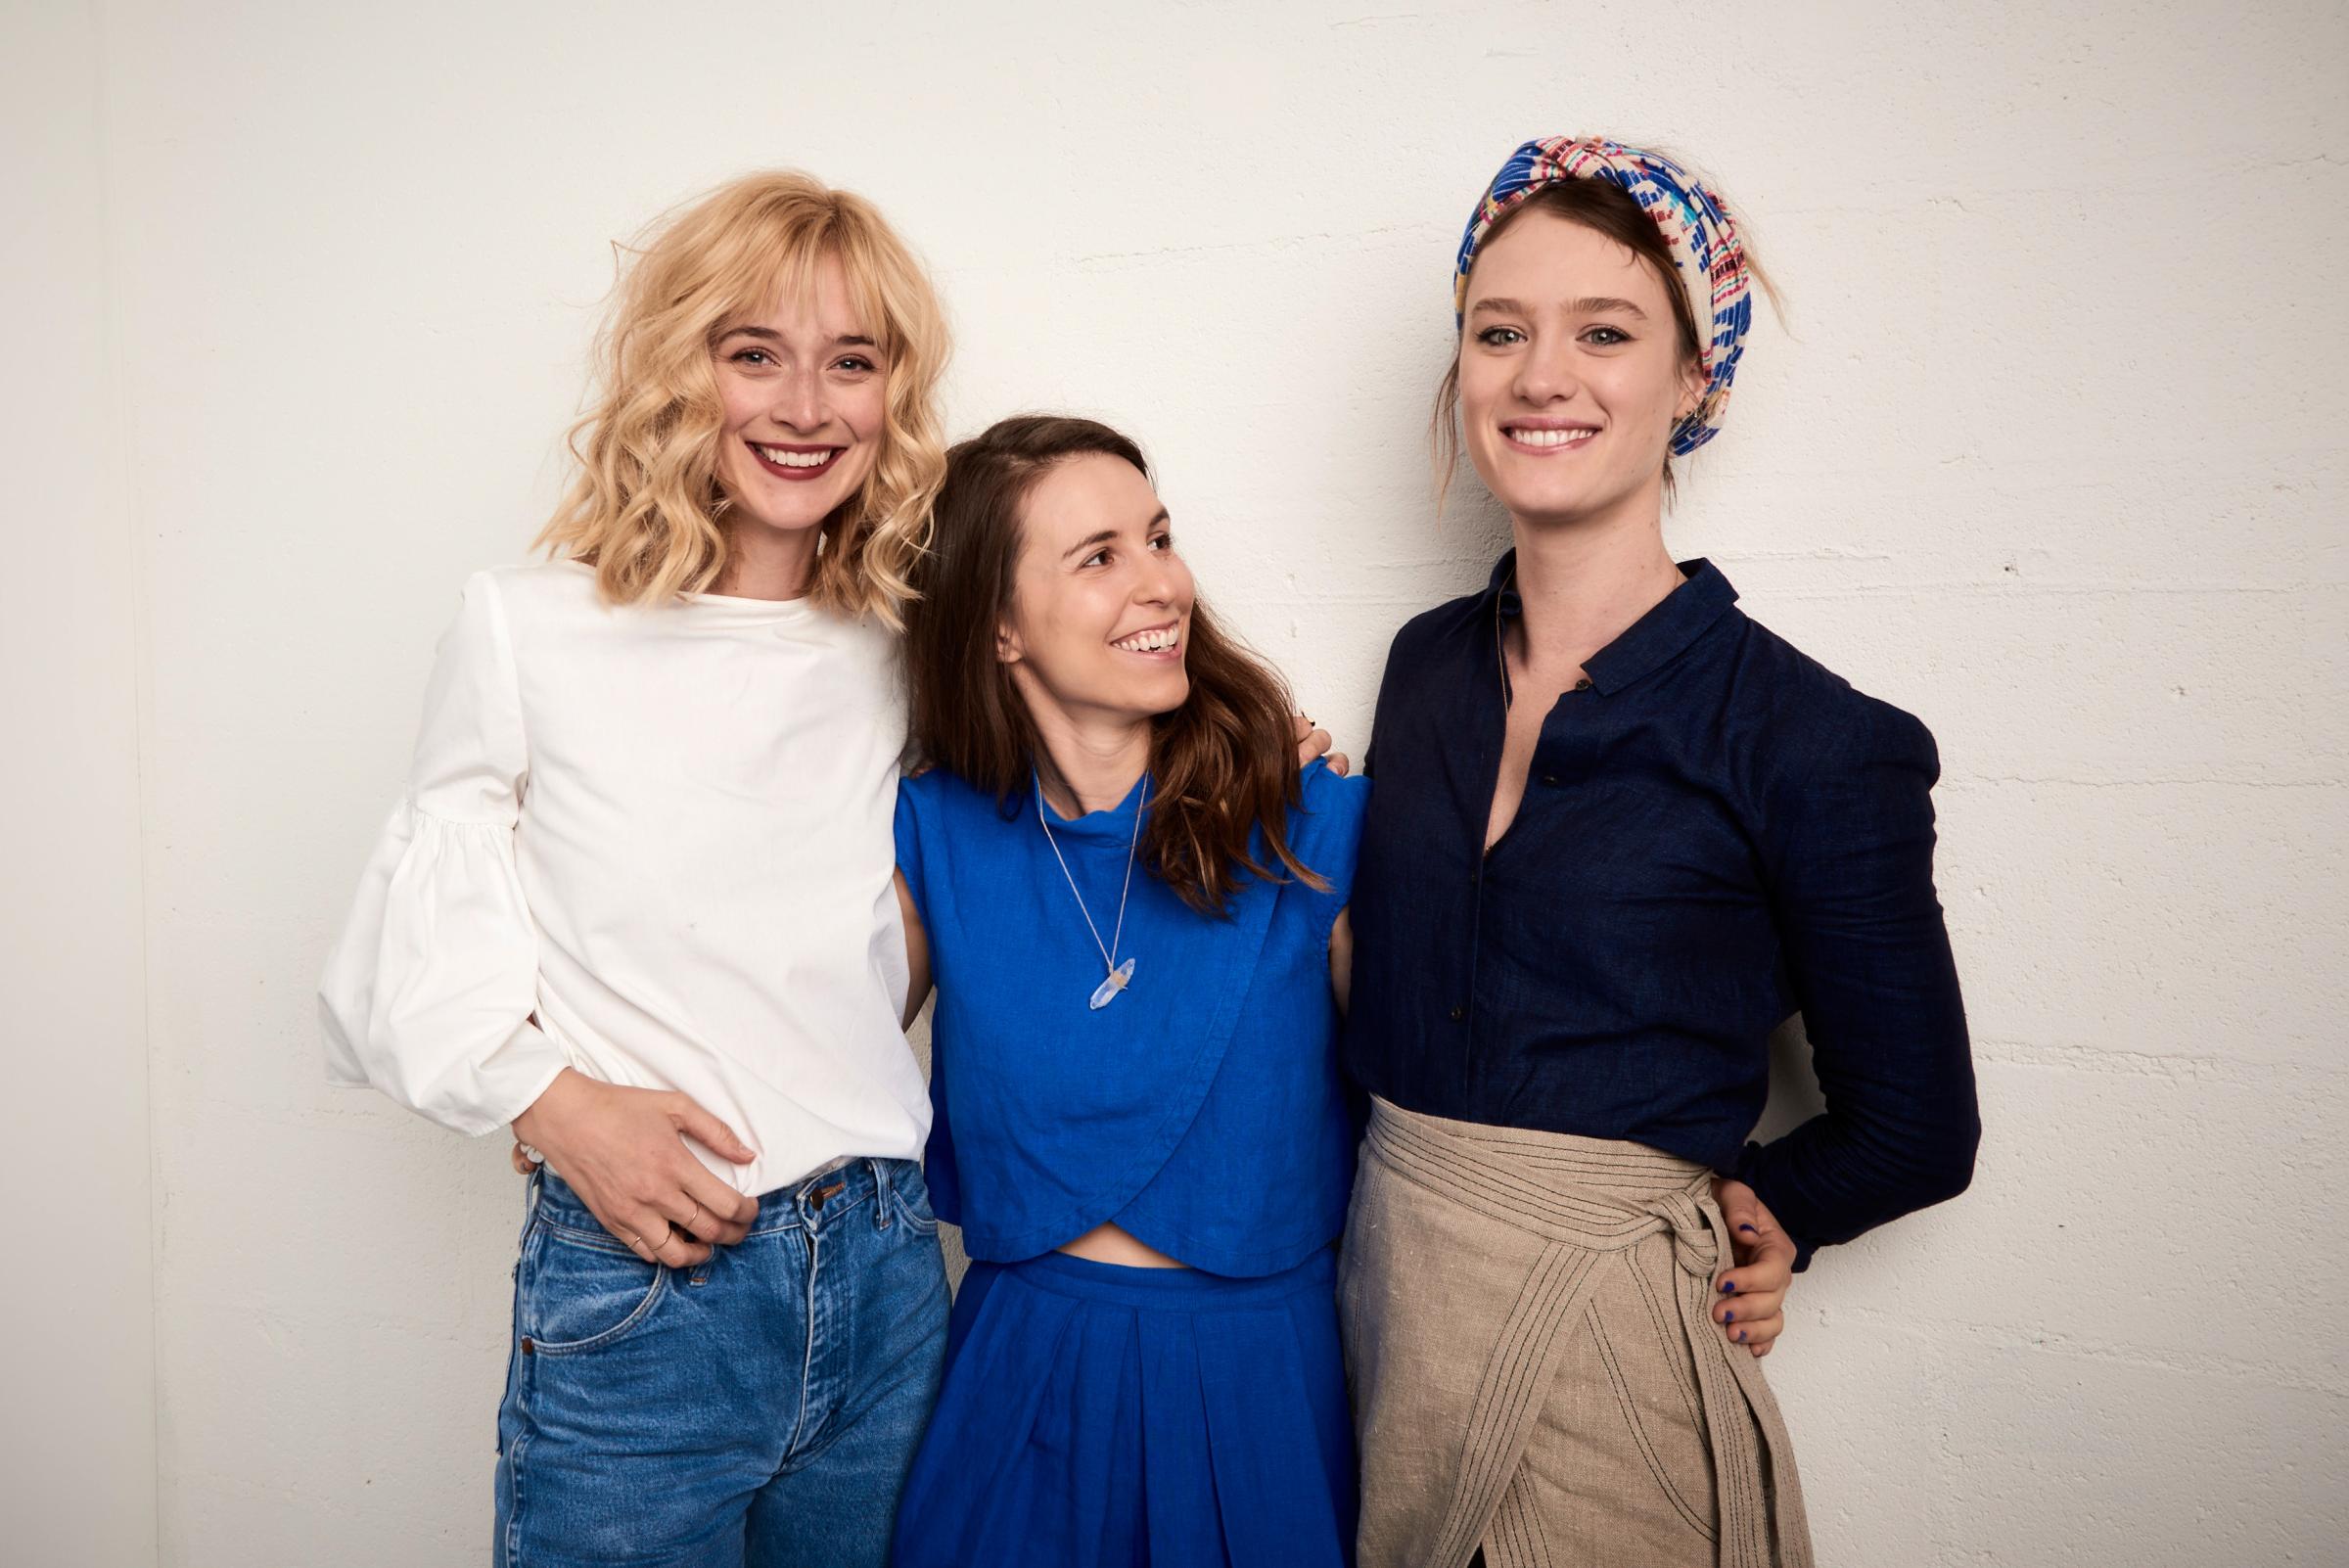 Actress Caitlin FitzGerald, director Sophia Takal, and actress Mackenzie Davis pose at the Tribeca Film Festival Getty Images Studio on April 15, 2016 in New York City.